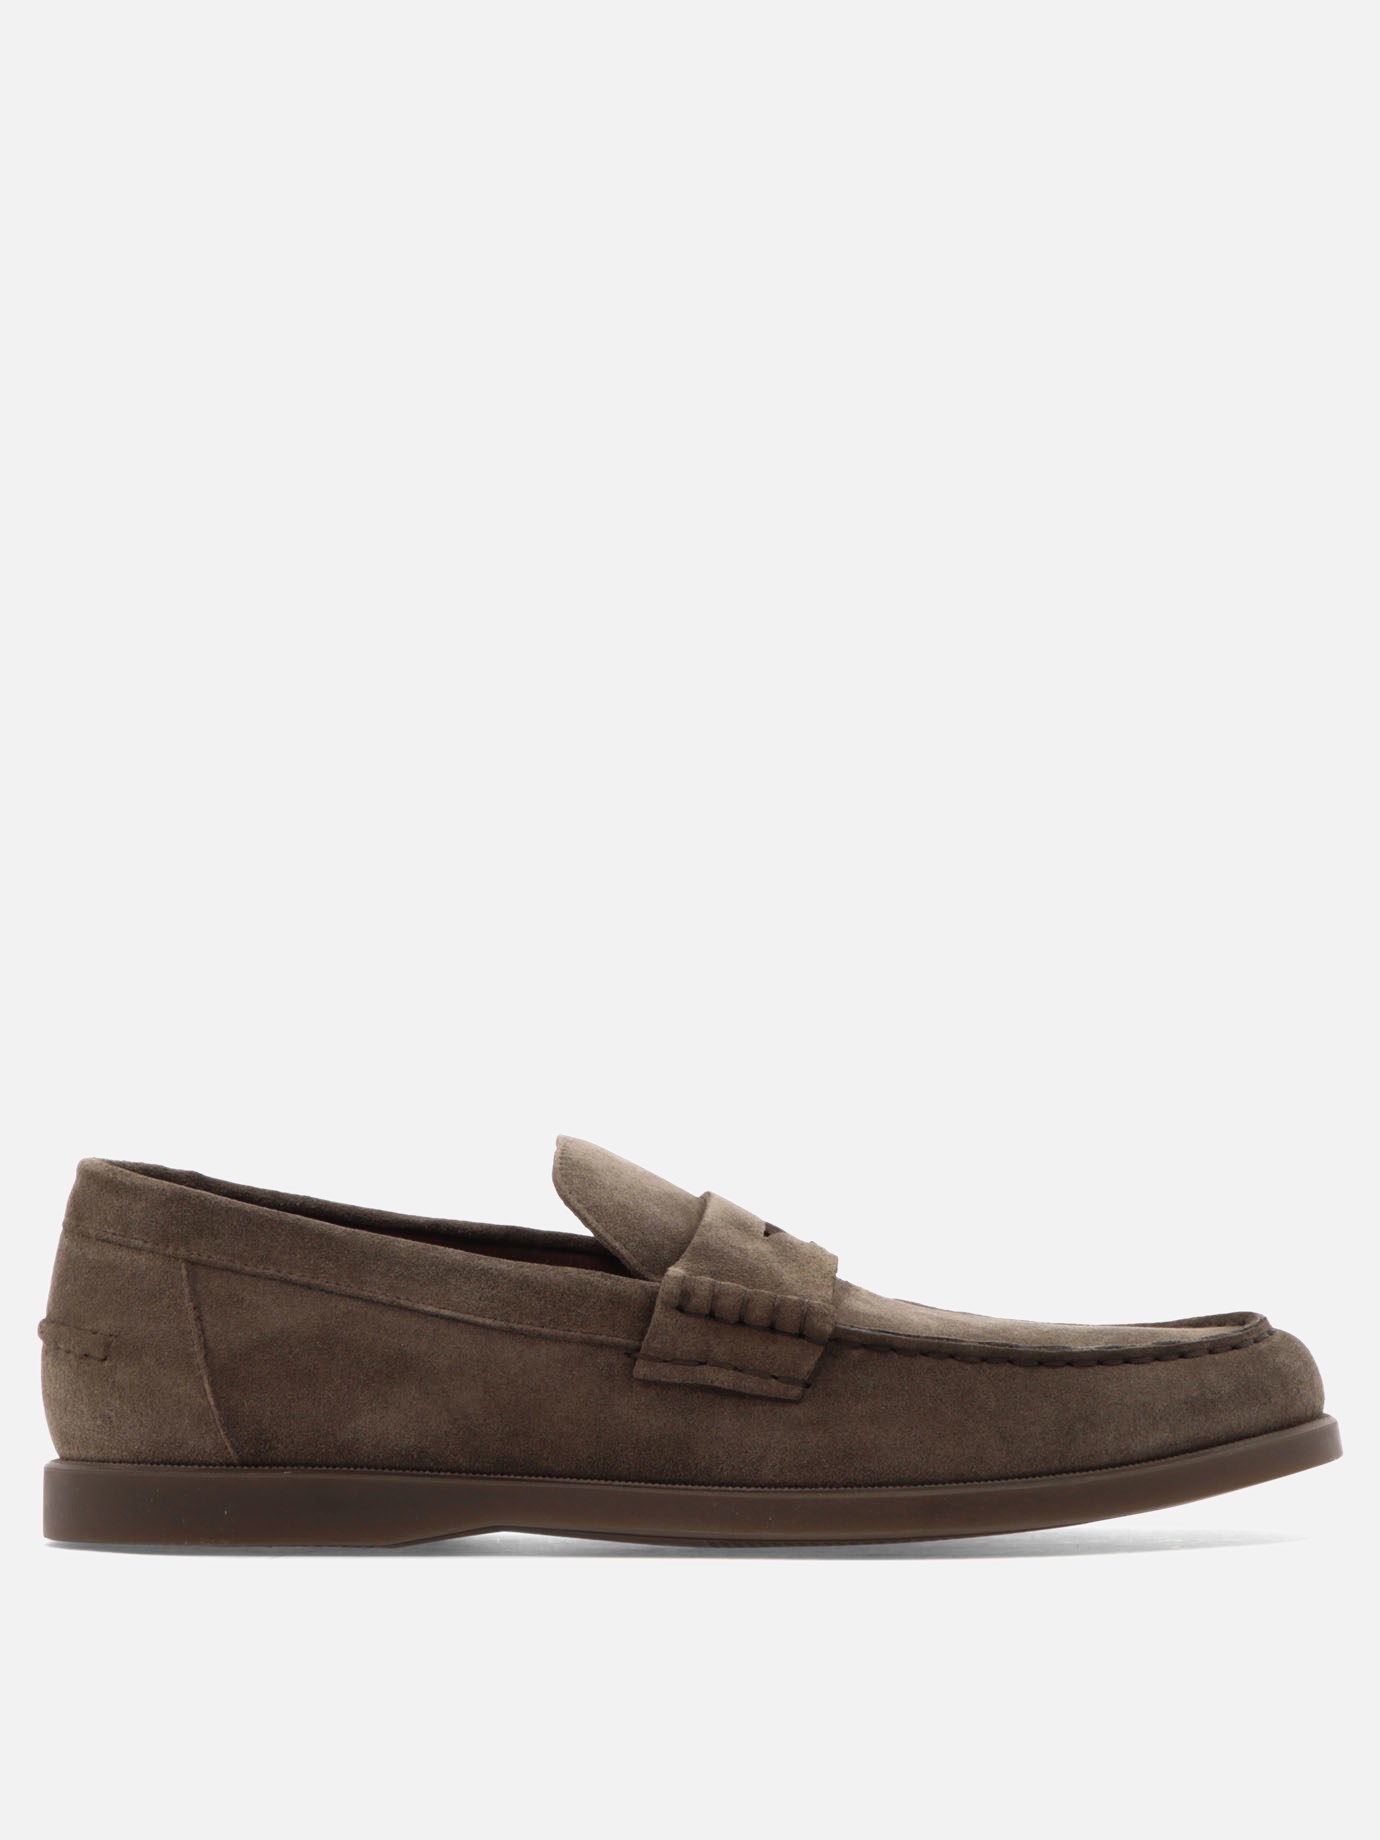  Wash  loafersby Doucal's - 2